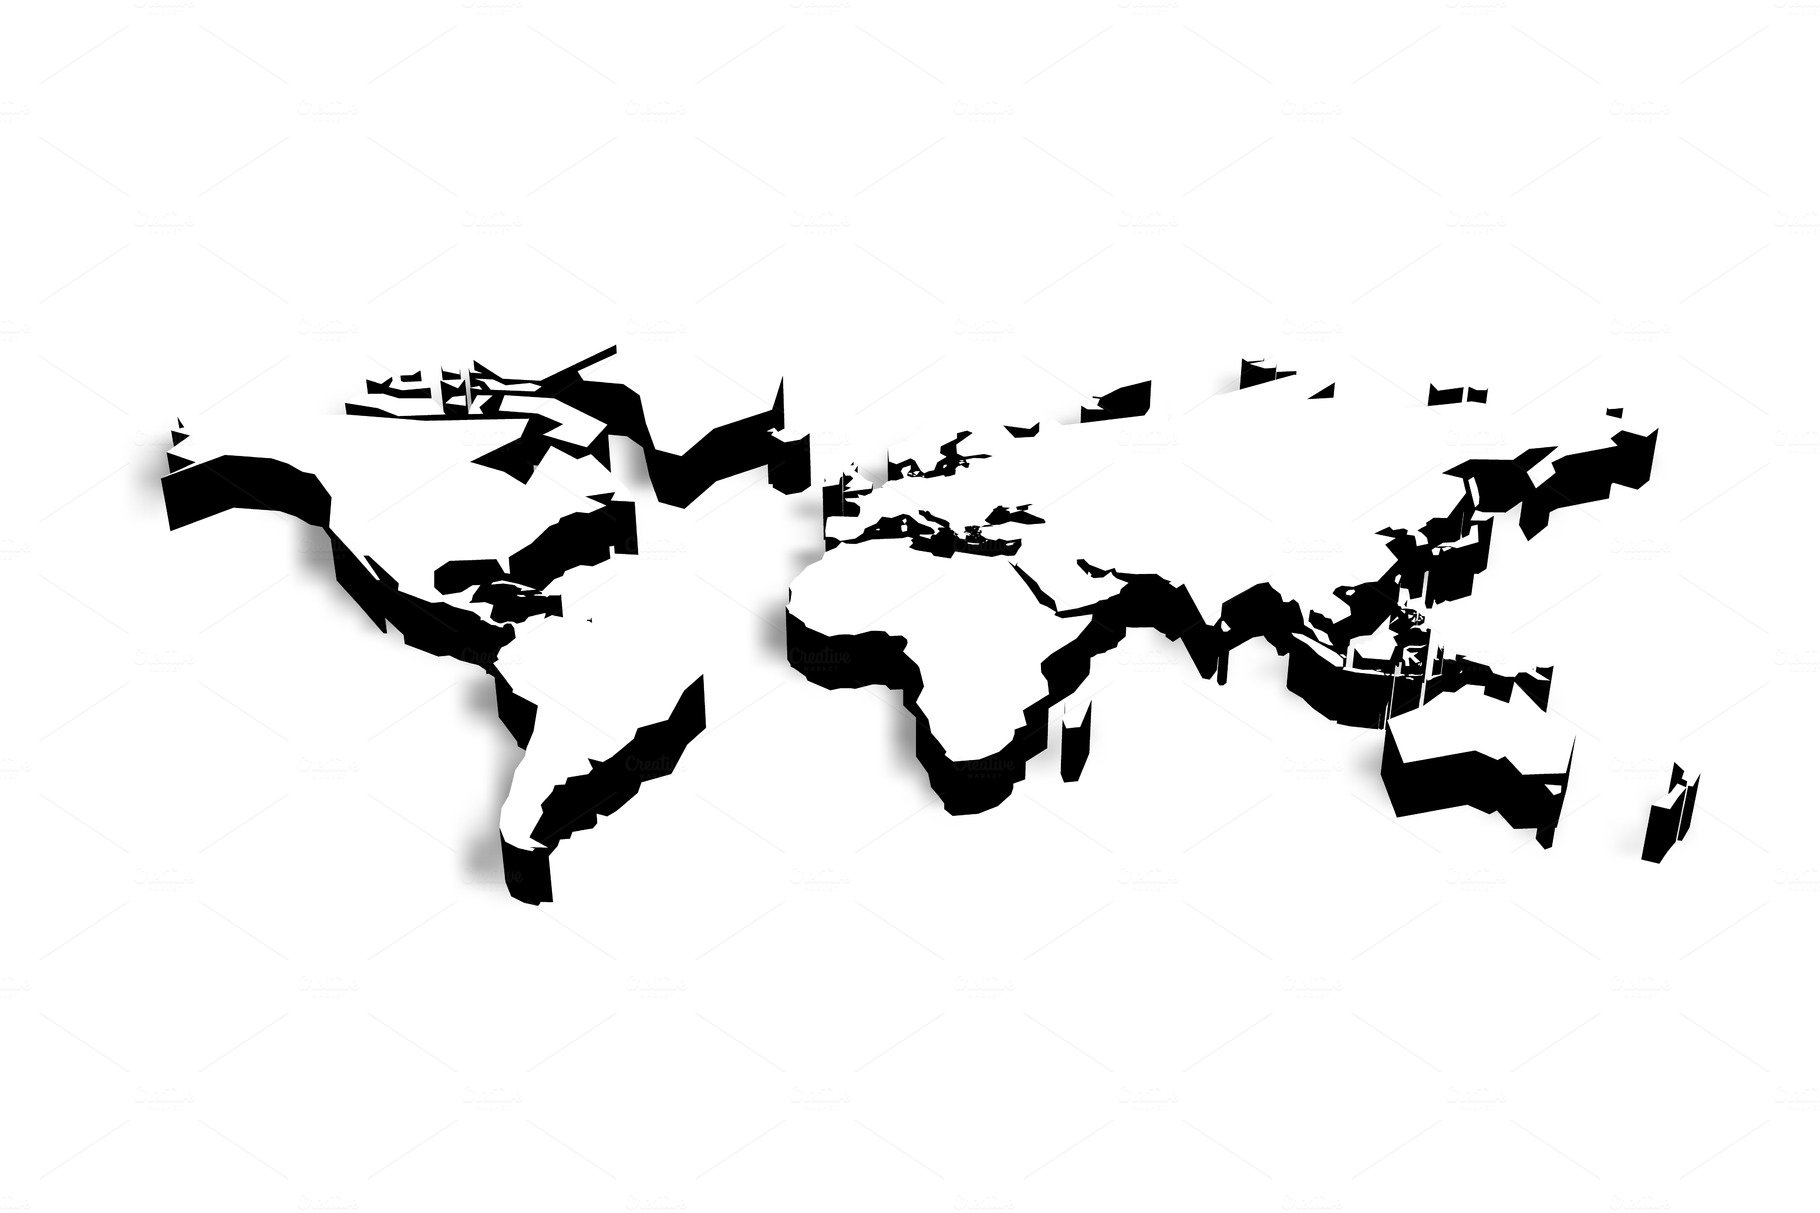 3d Map Of World With Shadow By Petr Polák On Dribbble